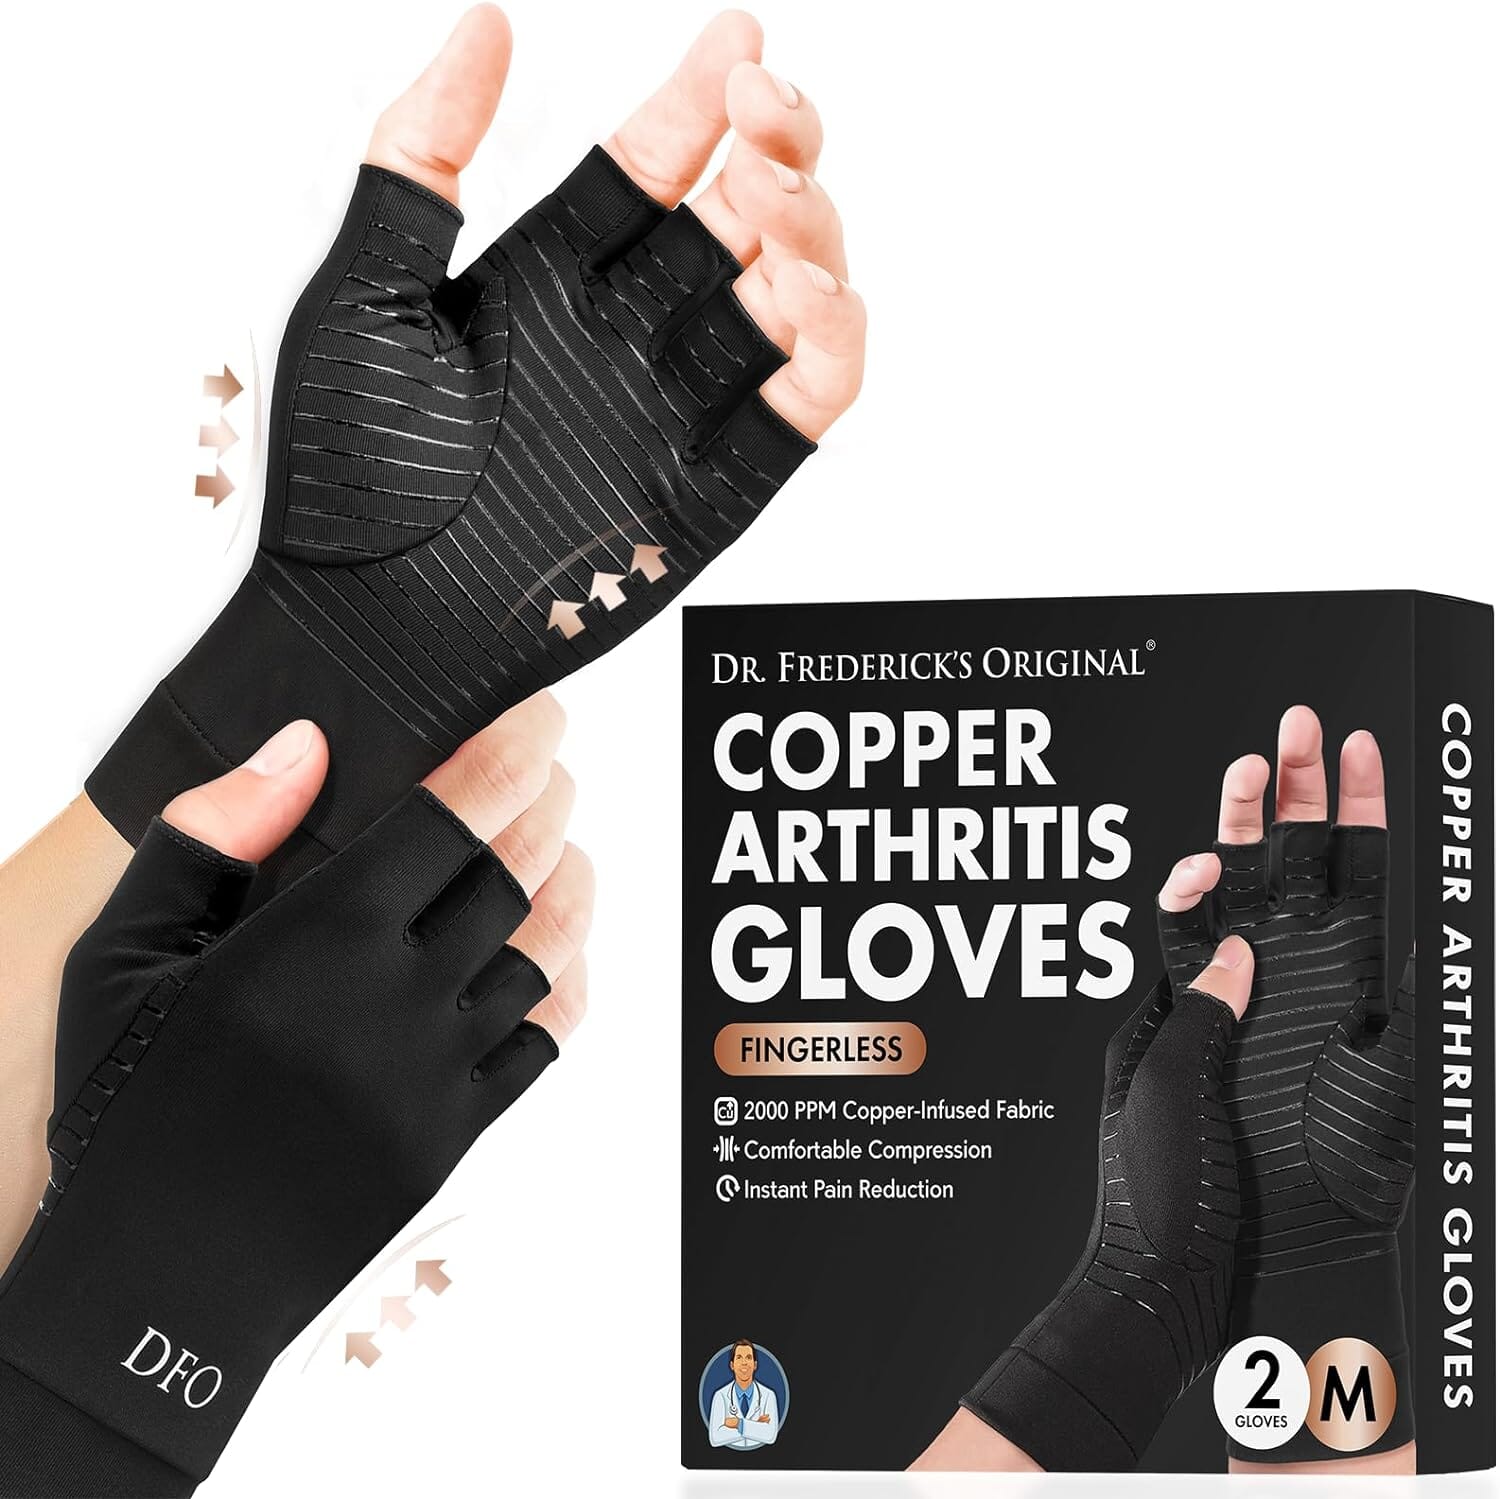 Dr. Frederick's Original Copper Arthritis Glove - 2 Gloves - Perfect Computer Typing Gloves - Fit Guaranteed Hand Pain Dr. Frederick's Original 